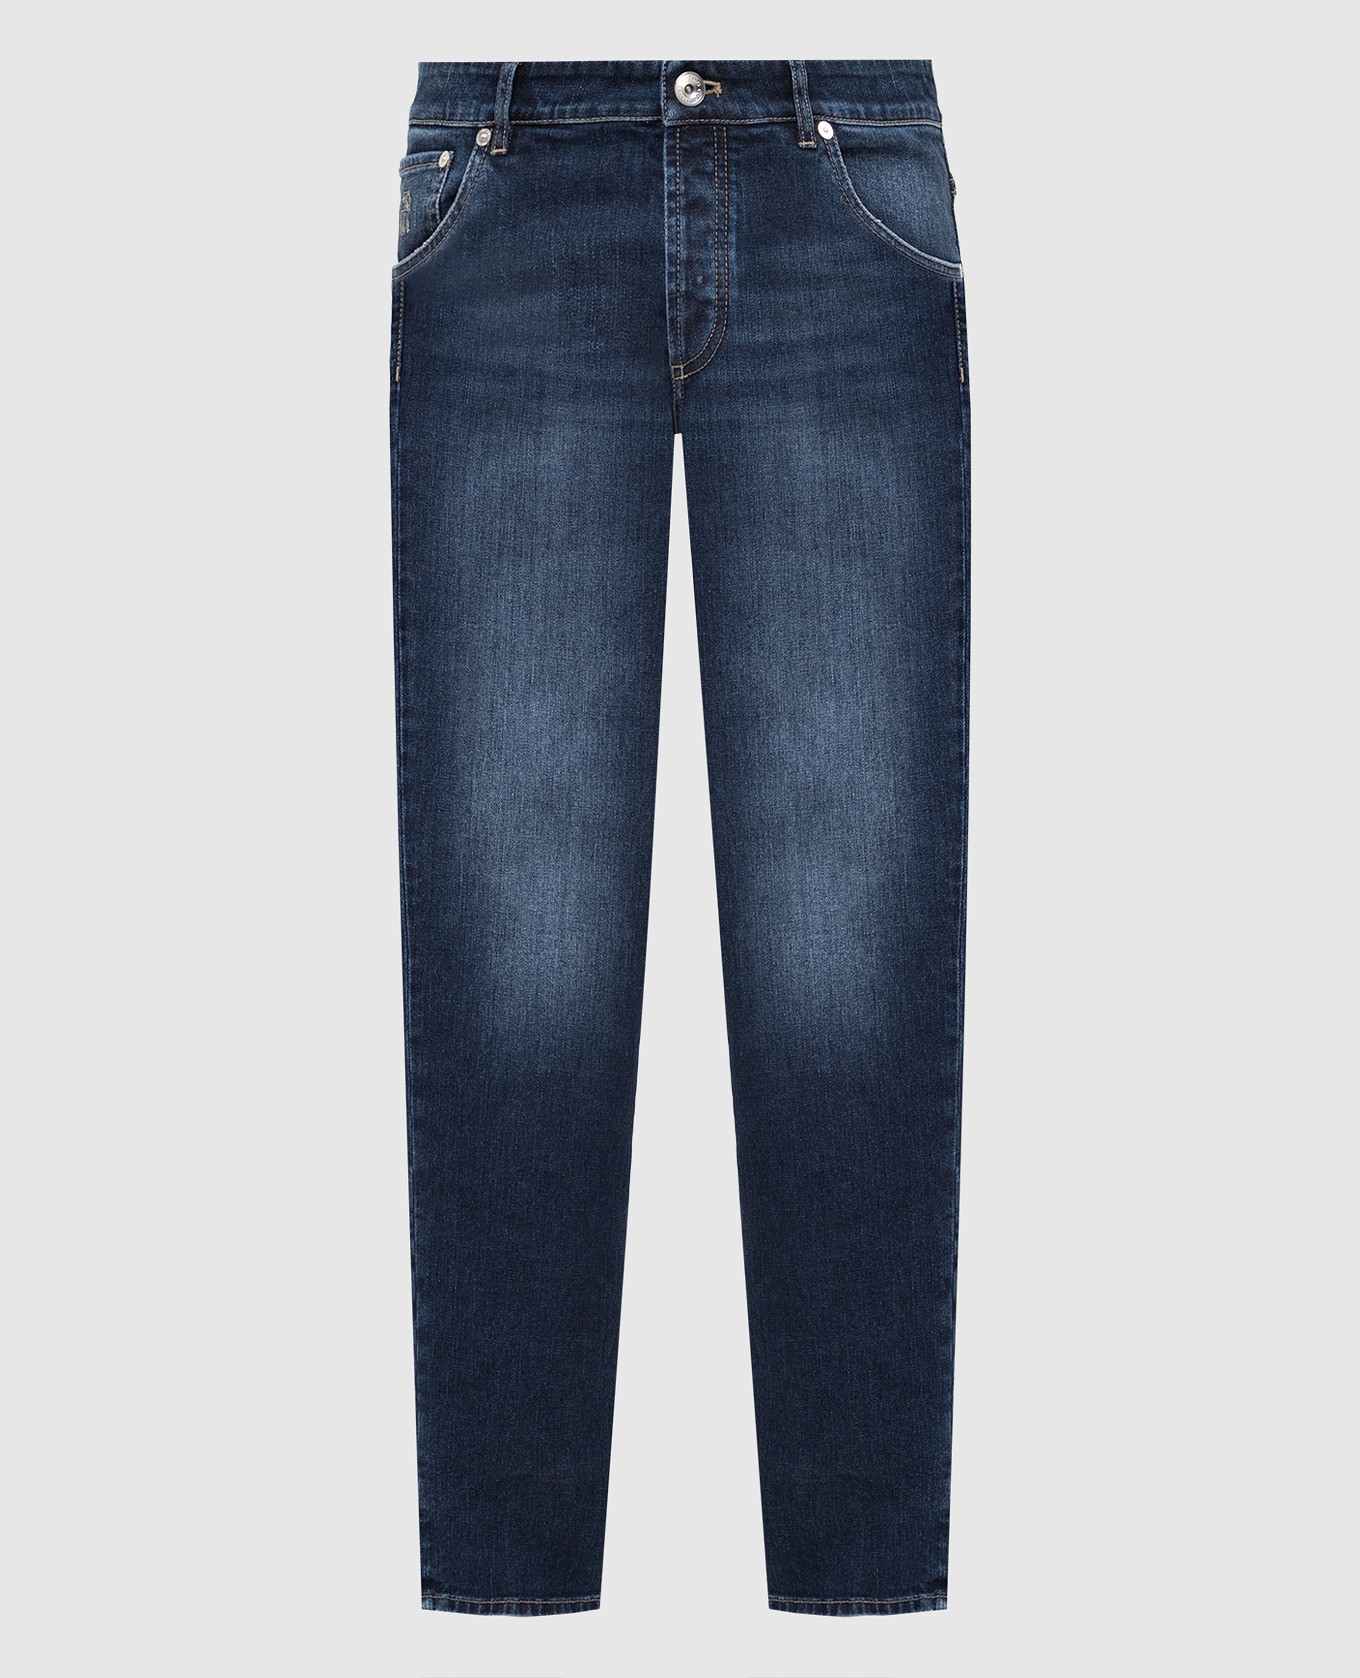 Washed effect skinny jeans